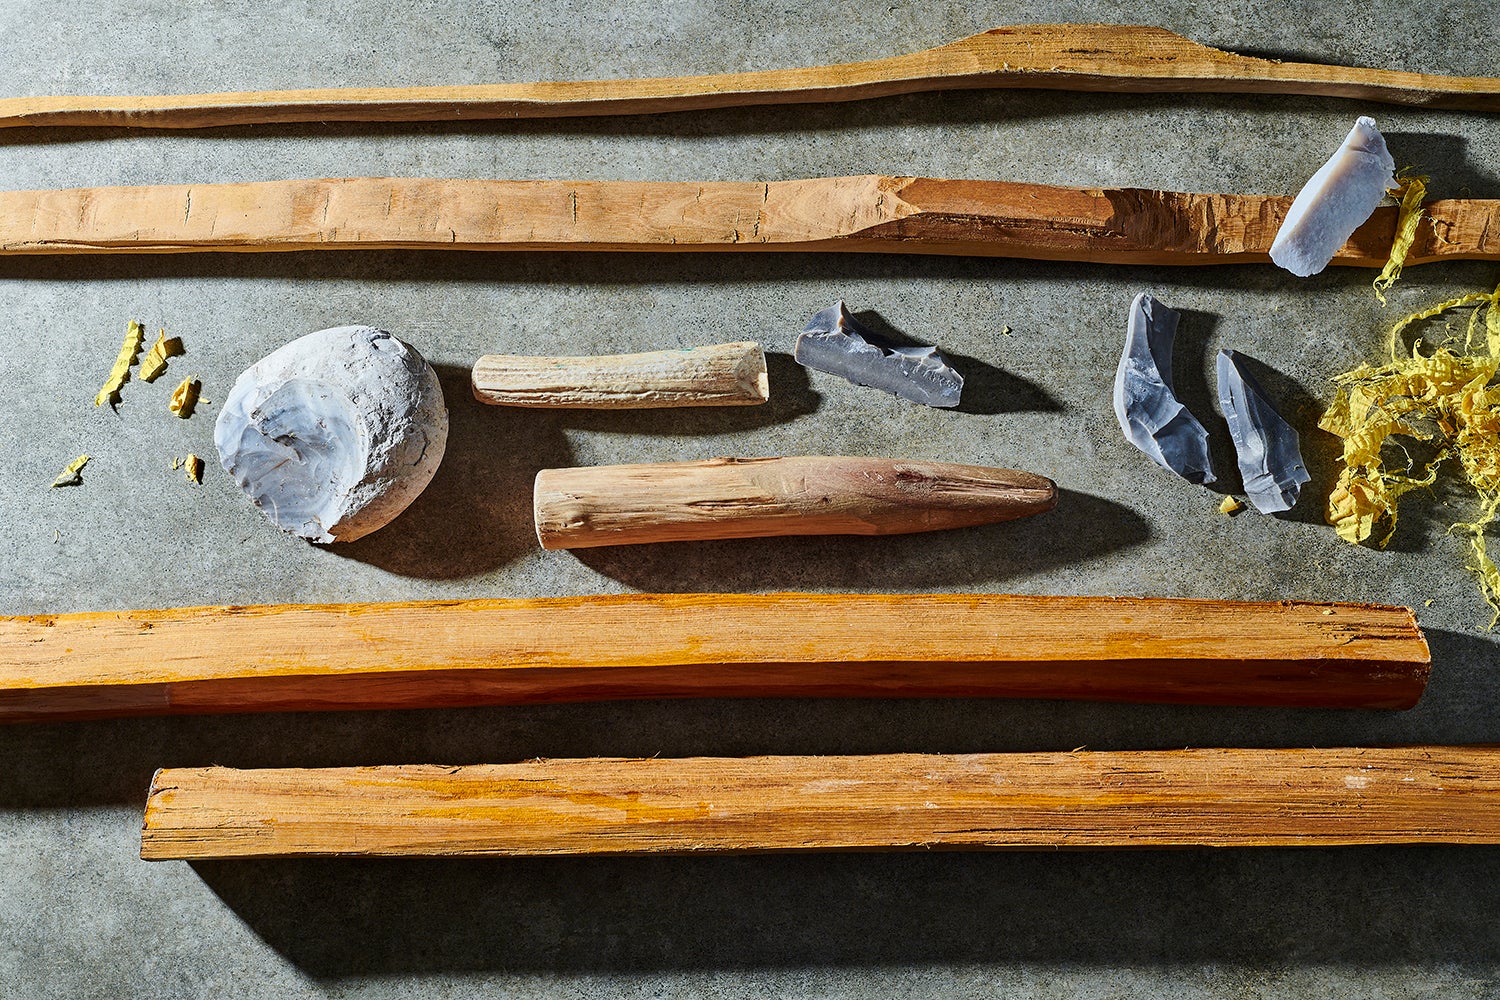 Ryan Gill's Tools for Making Bows